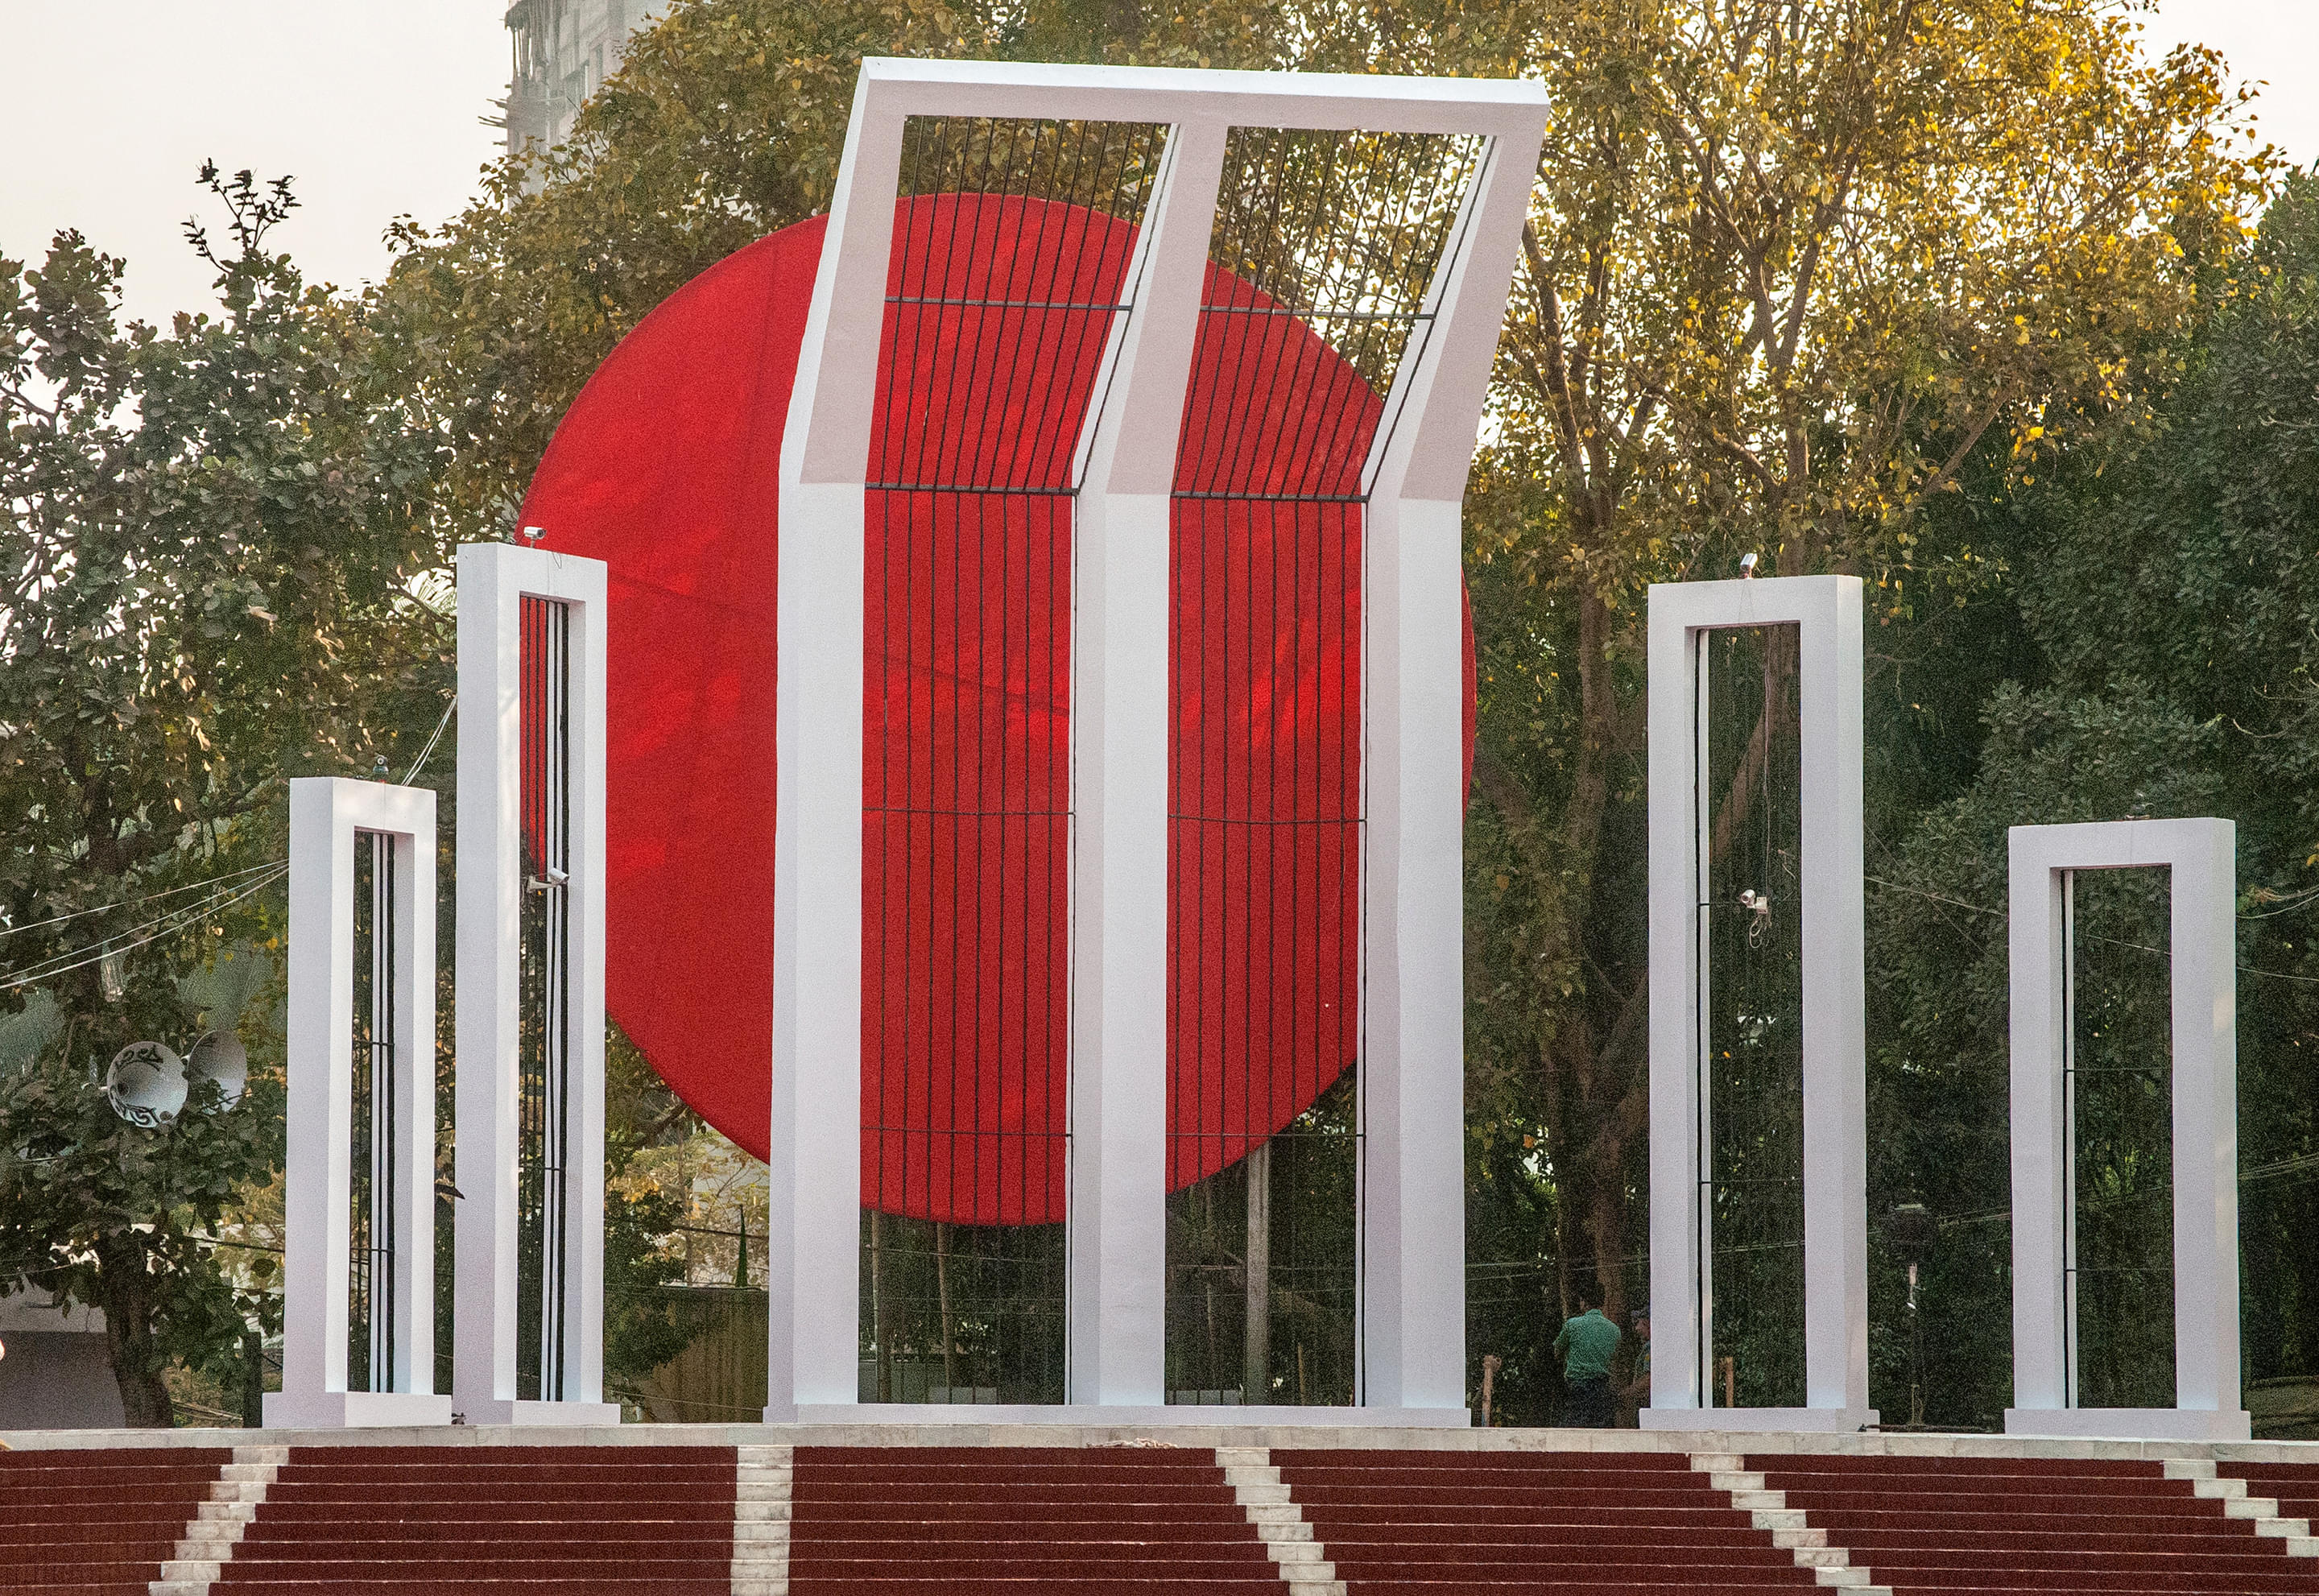 Shaheed Minar Overview